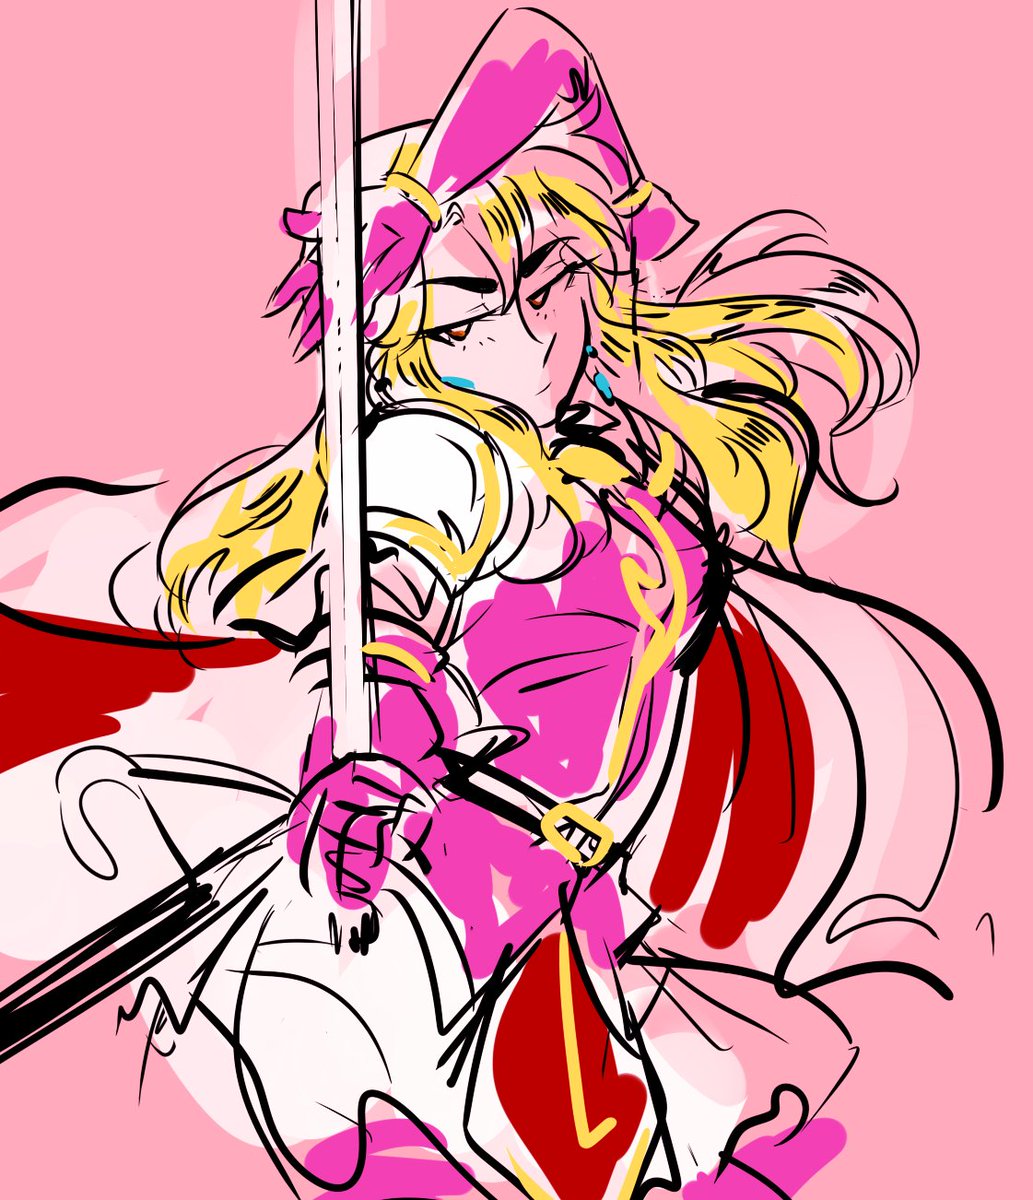 on the topic of lachesis... mmm these are my 4 favorite lachs ive drawnpic....